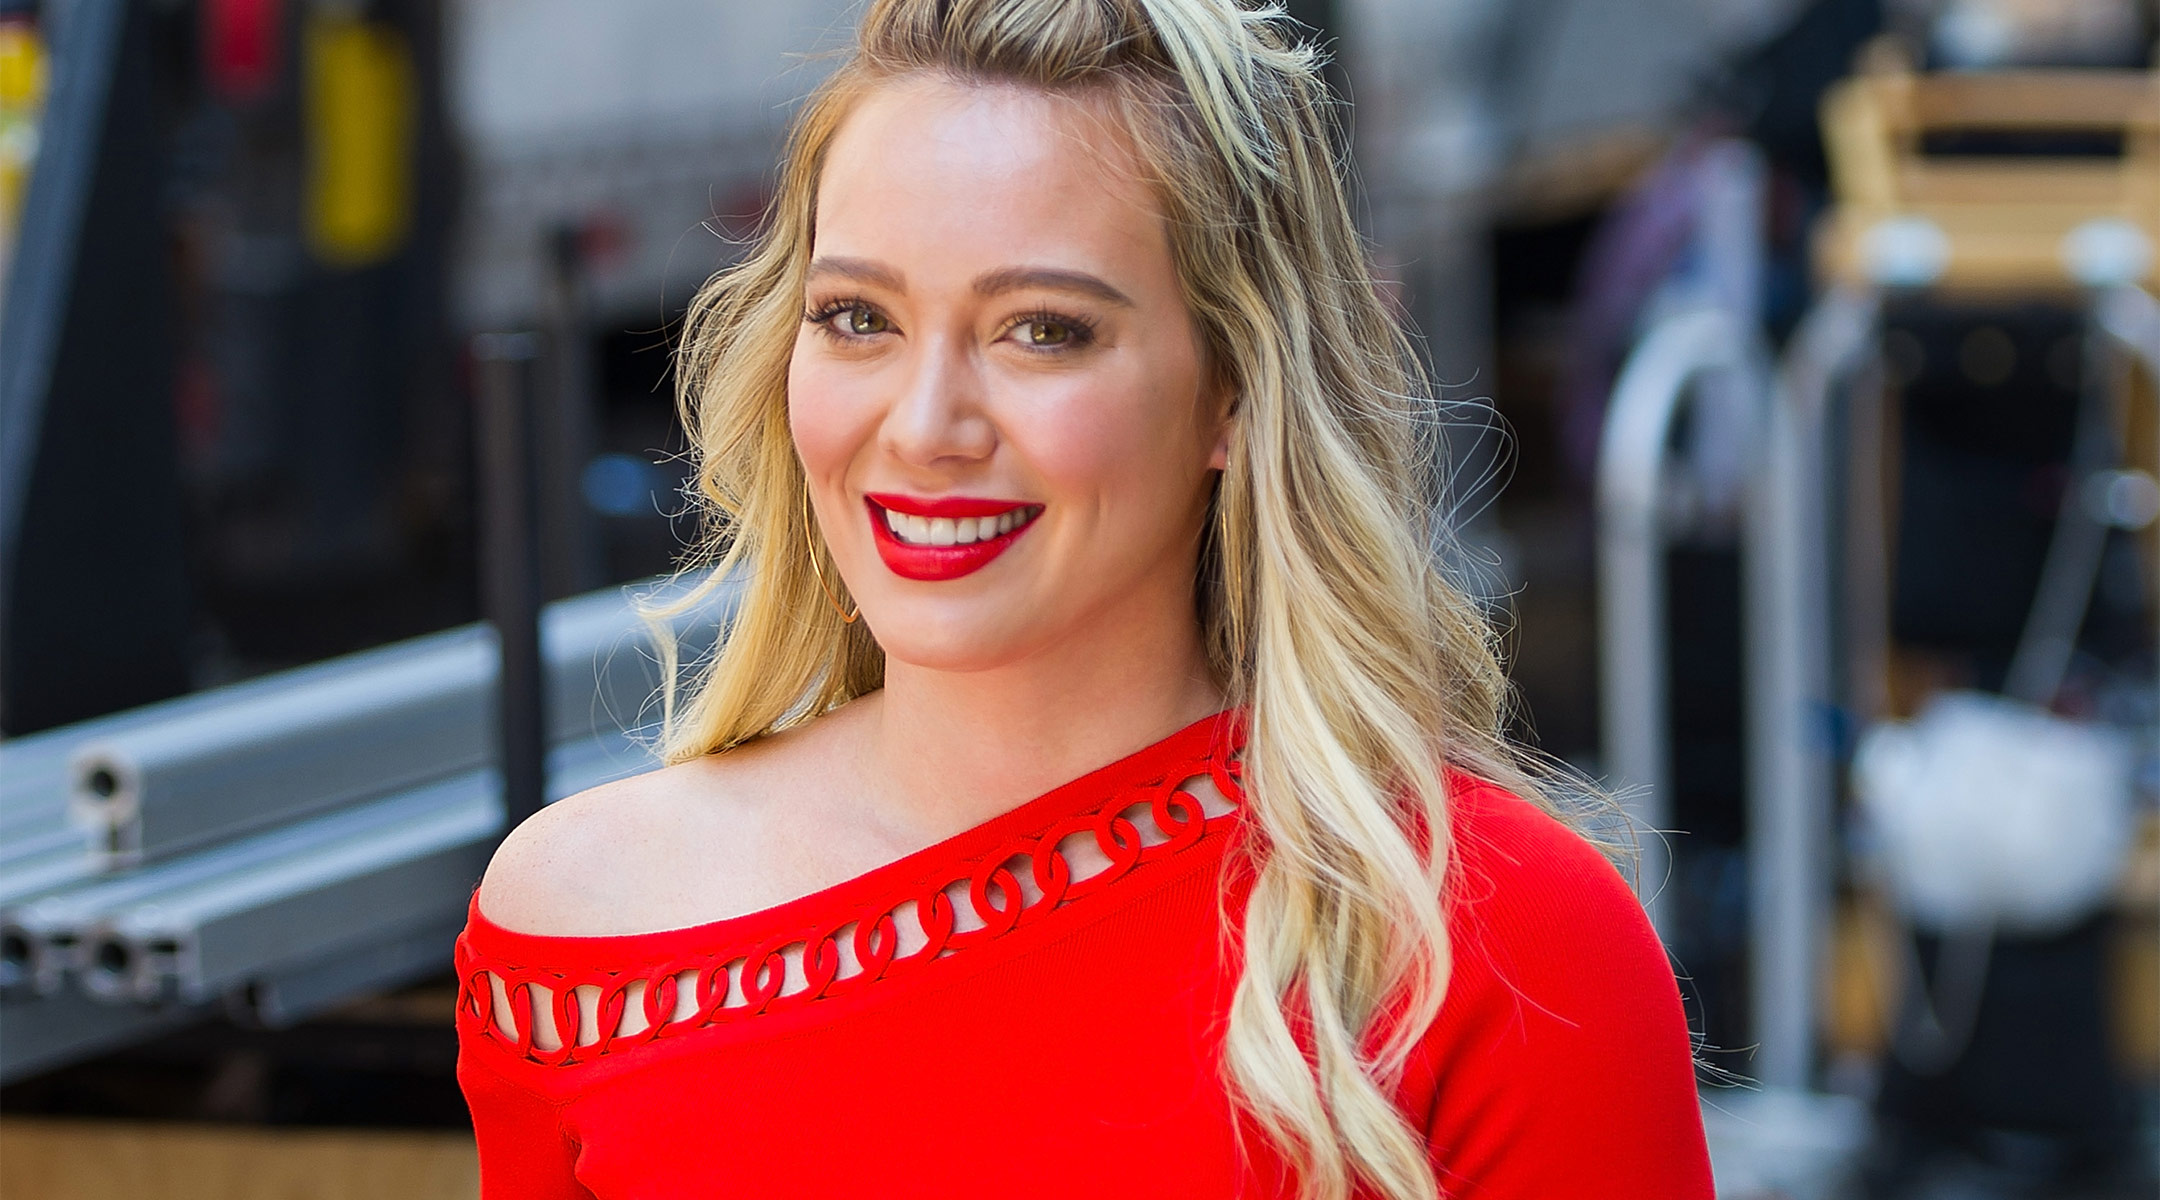 hilary duff speaks out against stalker who was following her when she's 9 months pregnant